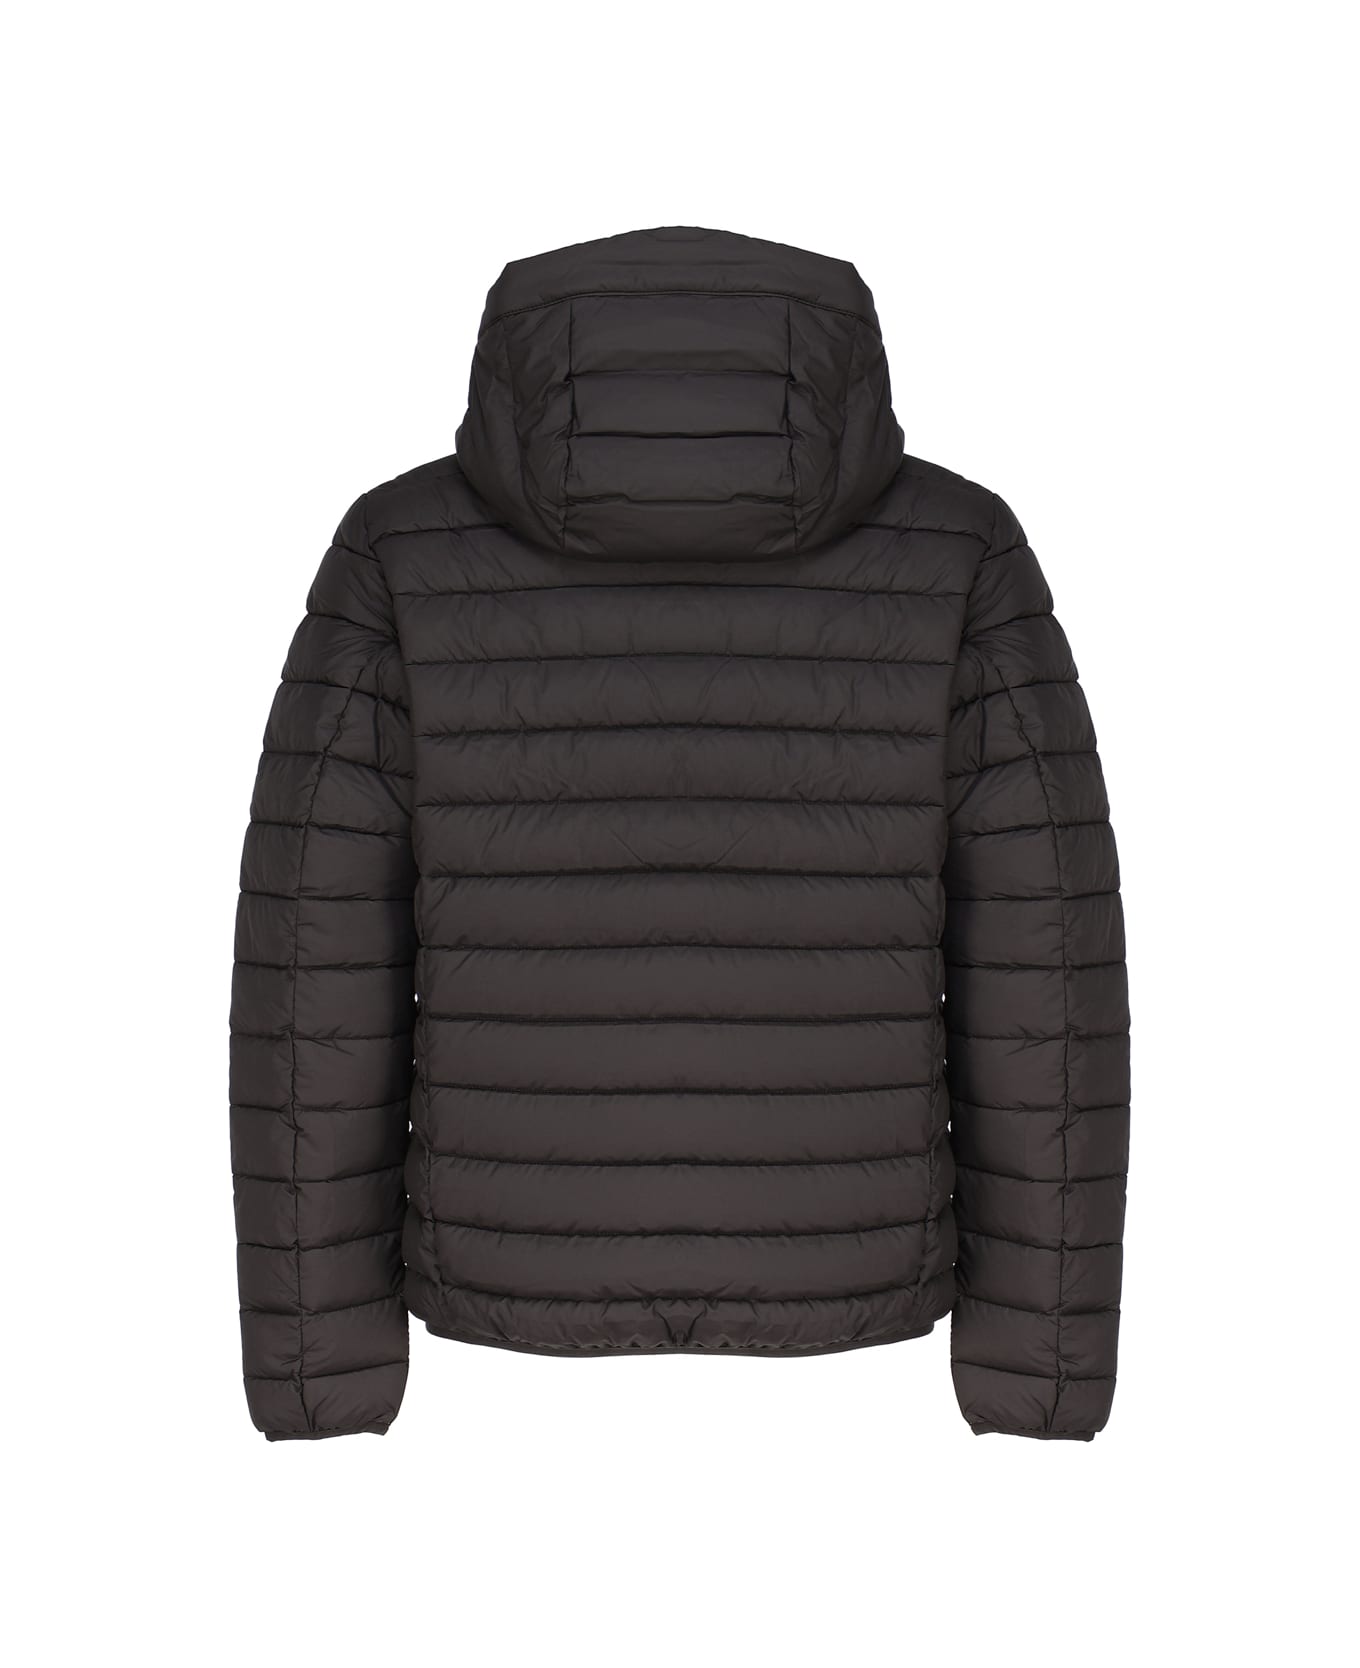 Save the Duck Jacket With Hood - Black